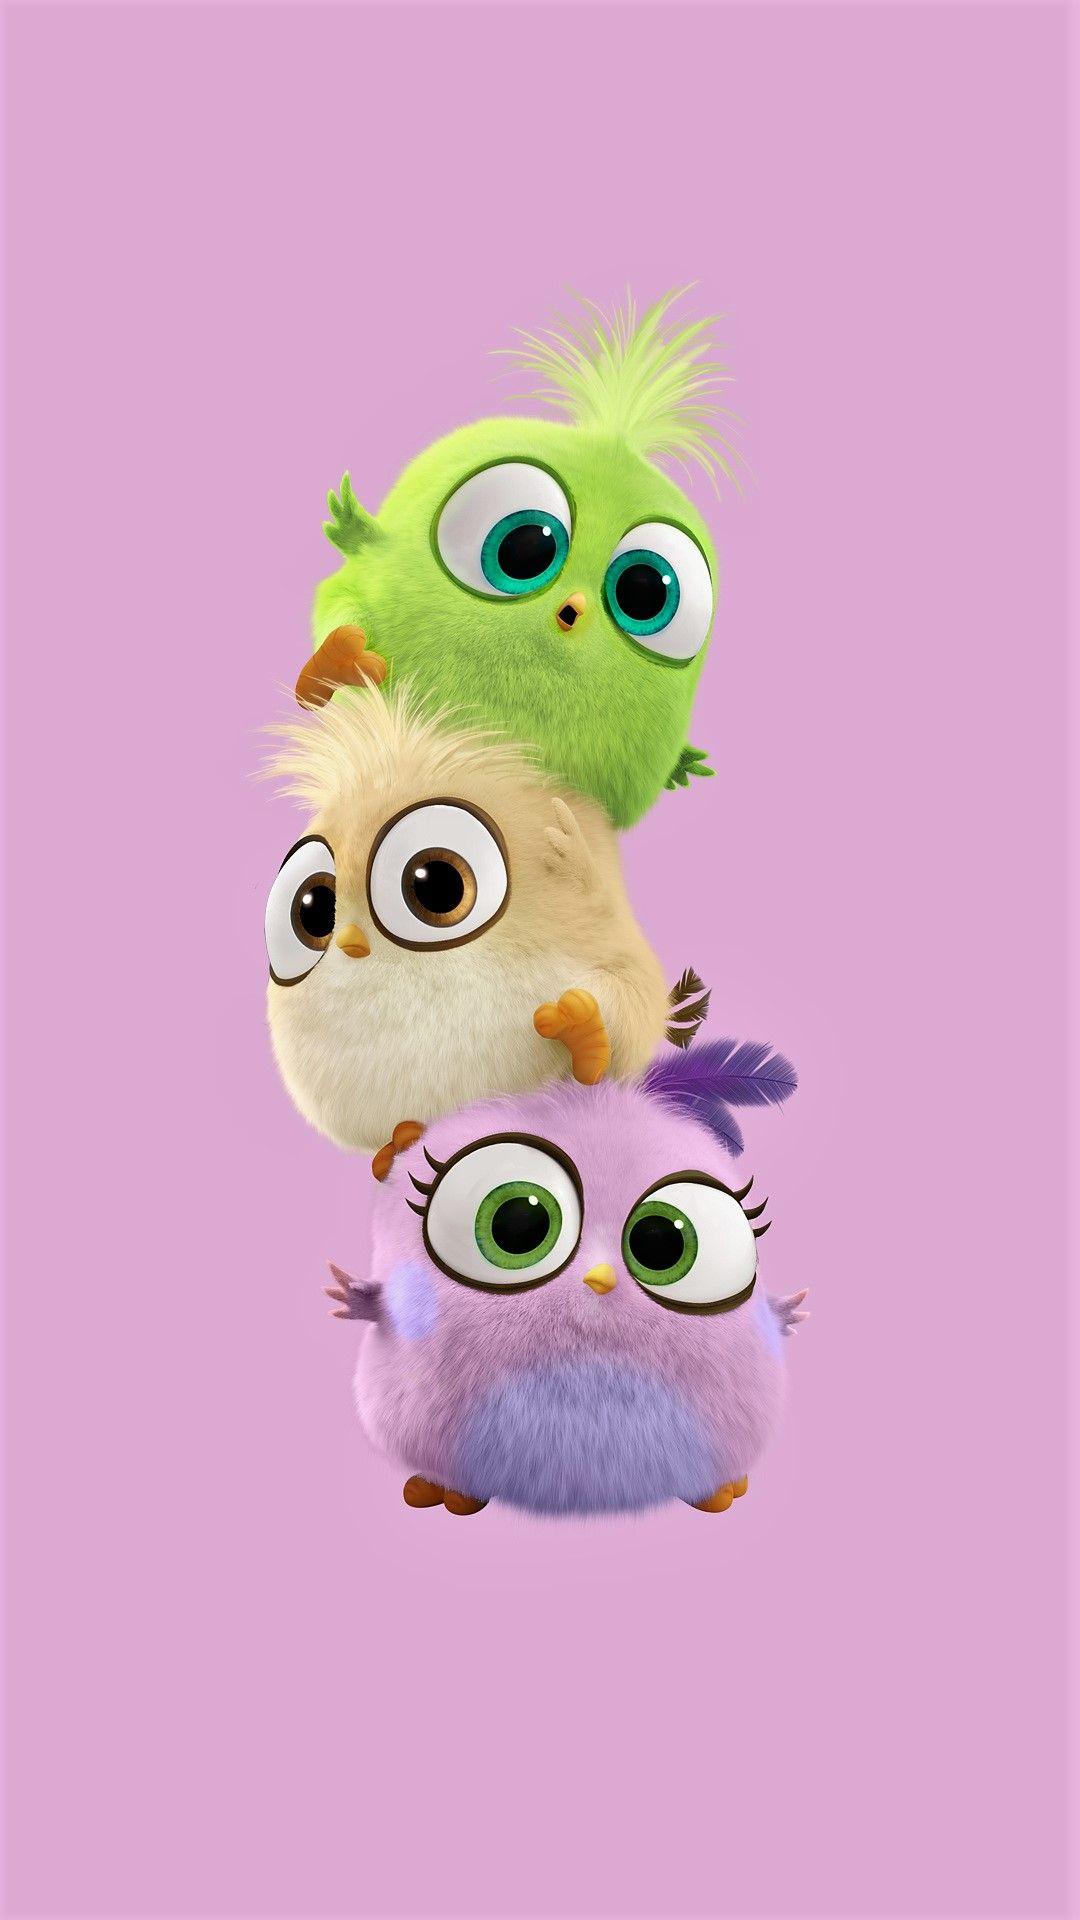 1080 x 1920 · jpeg - Baby Birds - Tap to see more cute cartoon wallpapers! - @mobile9 ...